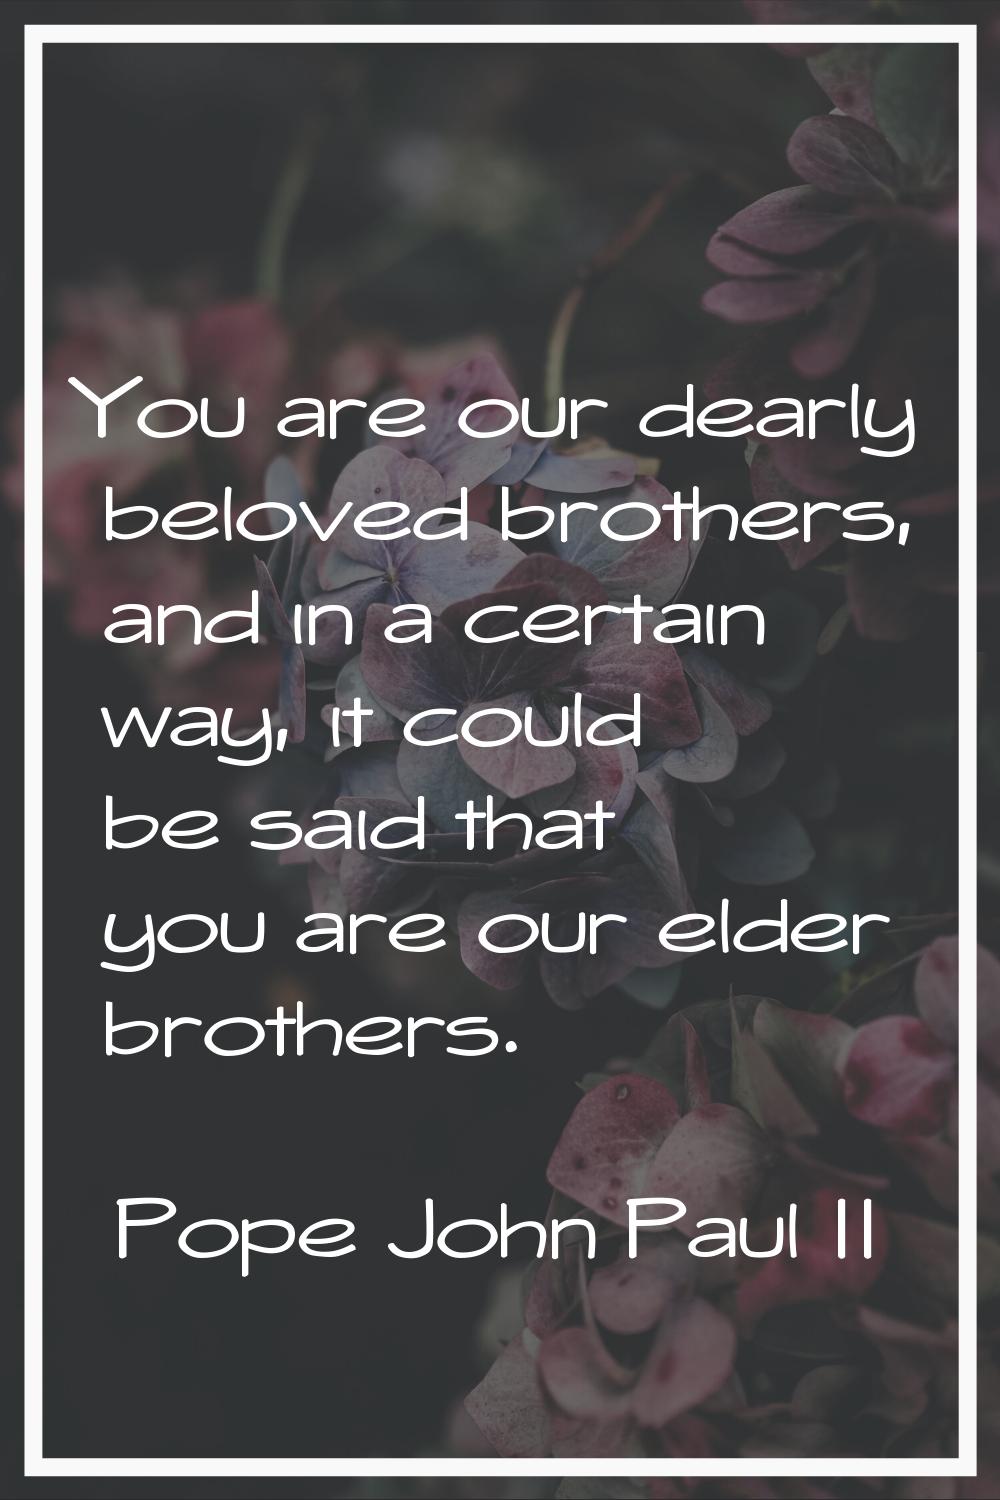 You are our dearly beloved brothers, and in a certain way, it could be said that you are our elder 